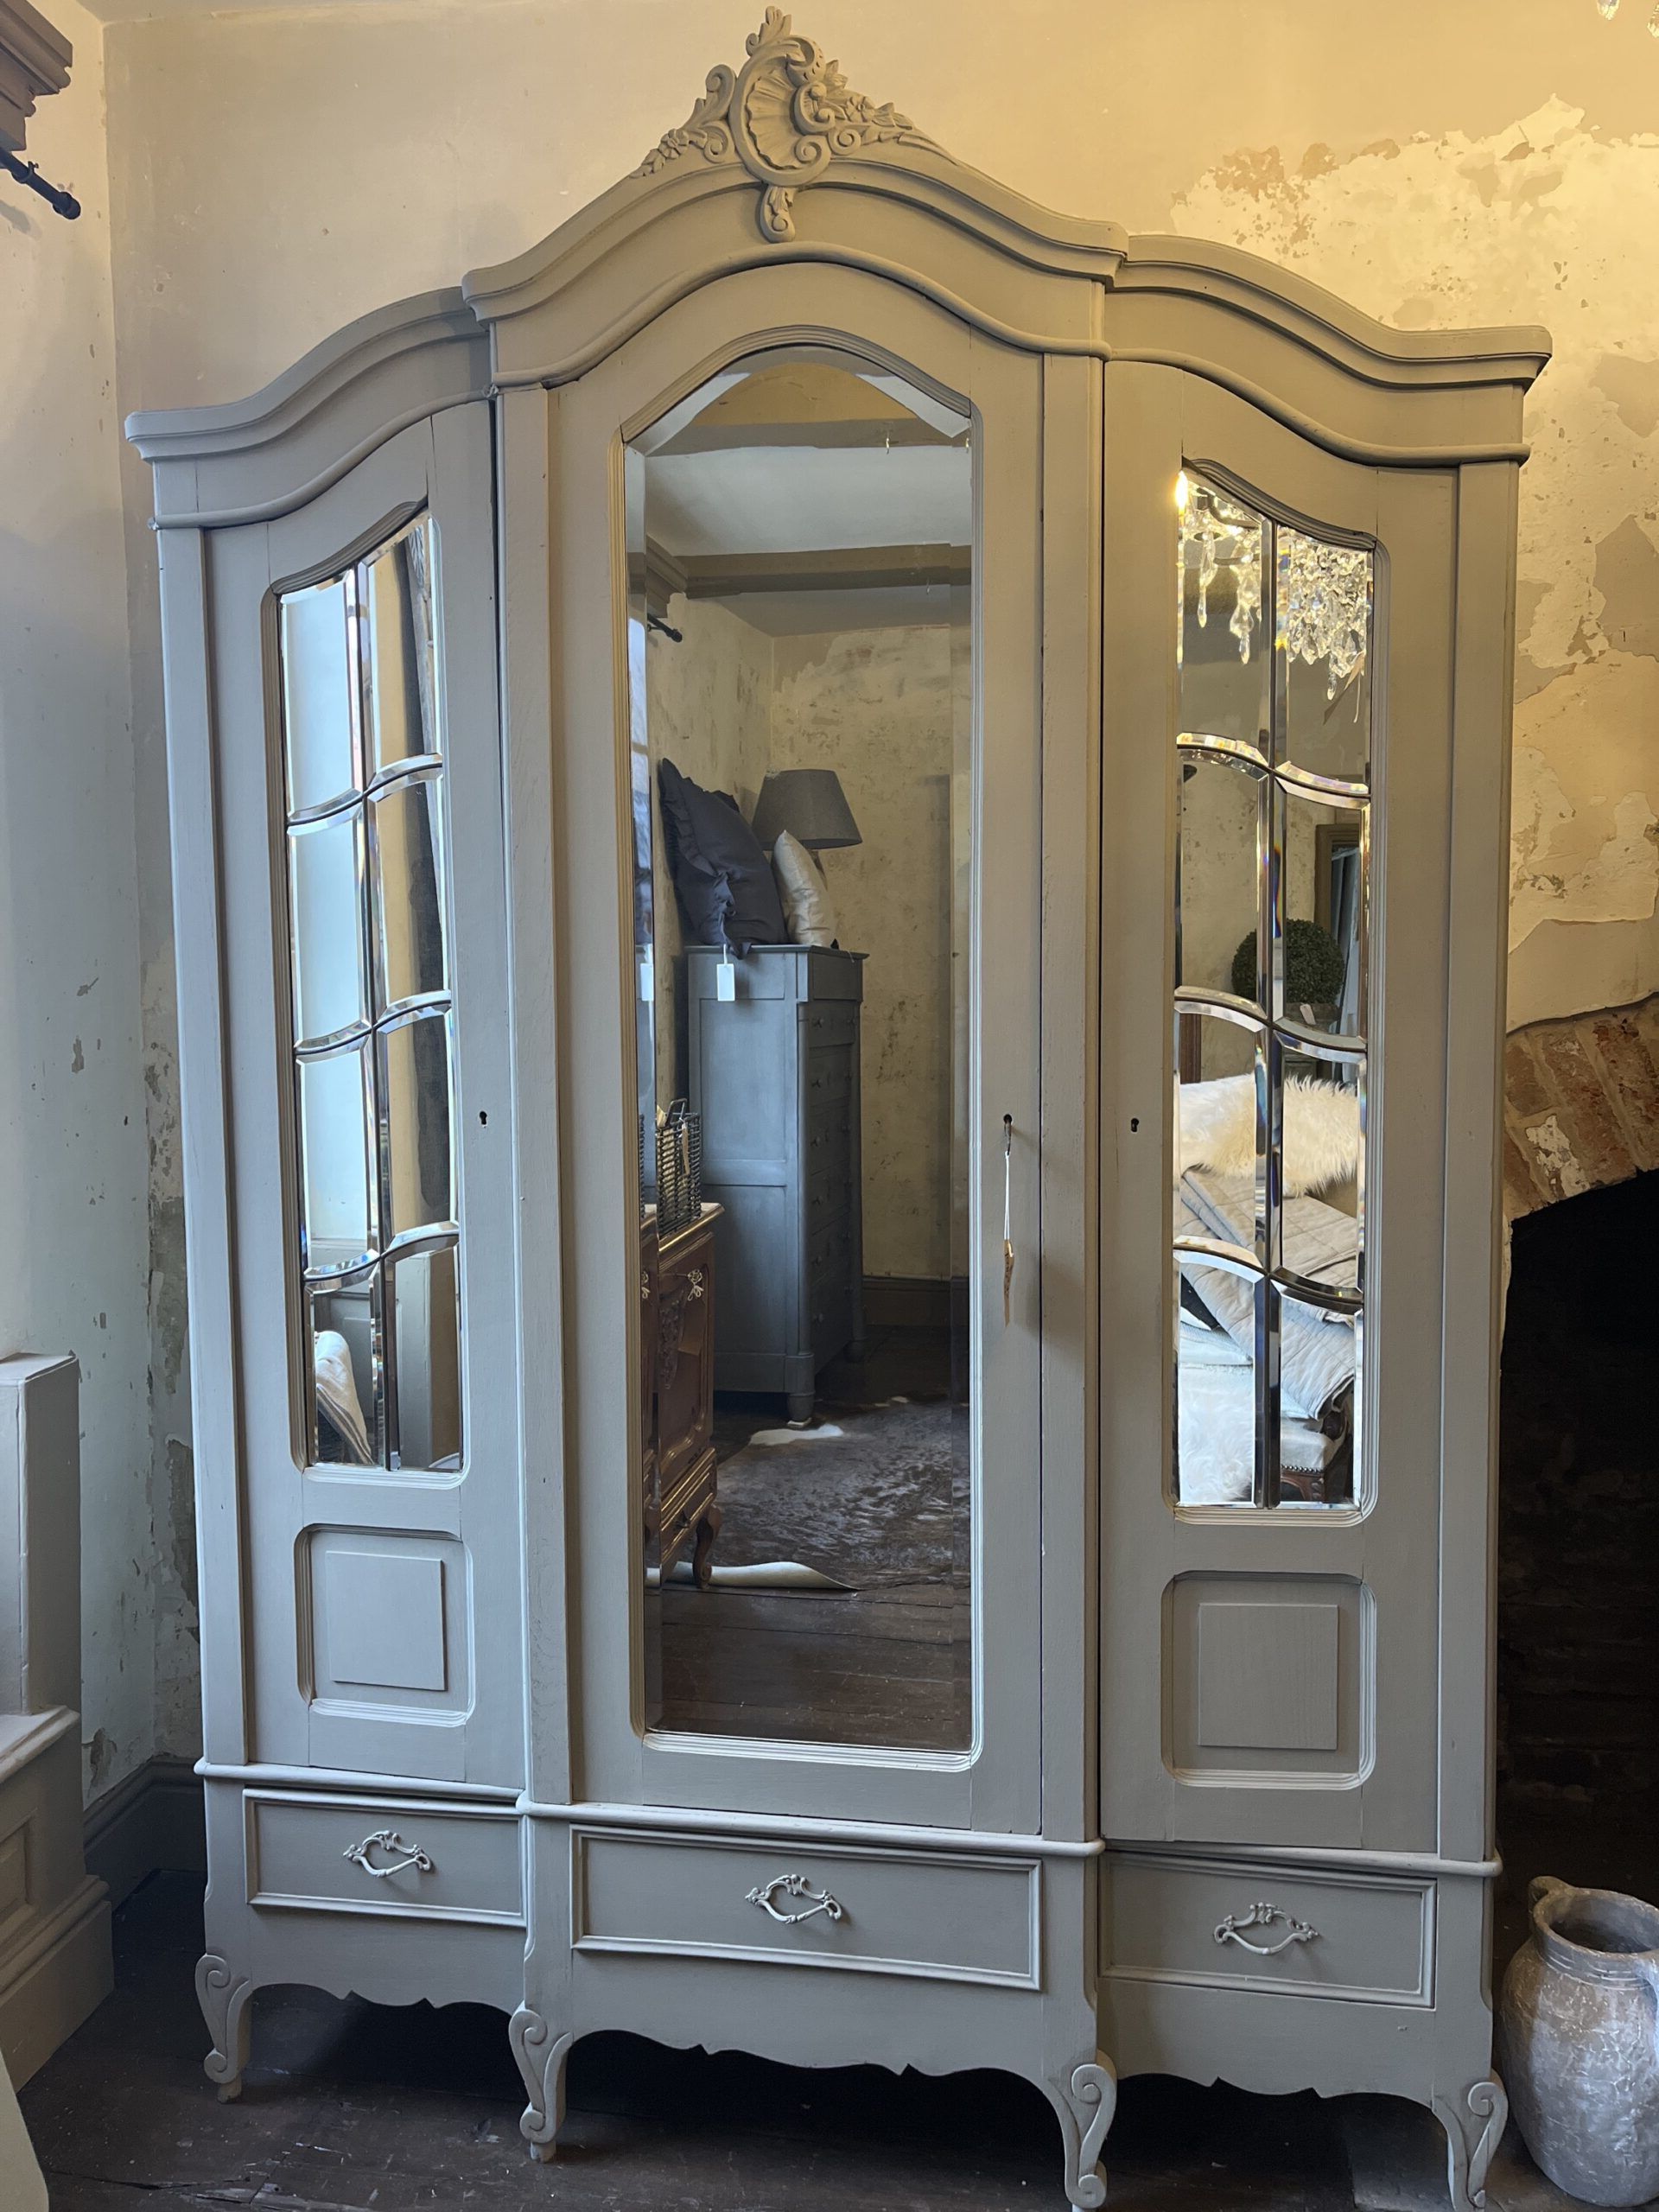 Armoires – Wardrobes – Vitrines | Village Chic Regarding French Armoire Wardrobes (View 13 of 20)